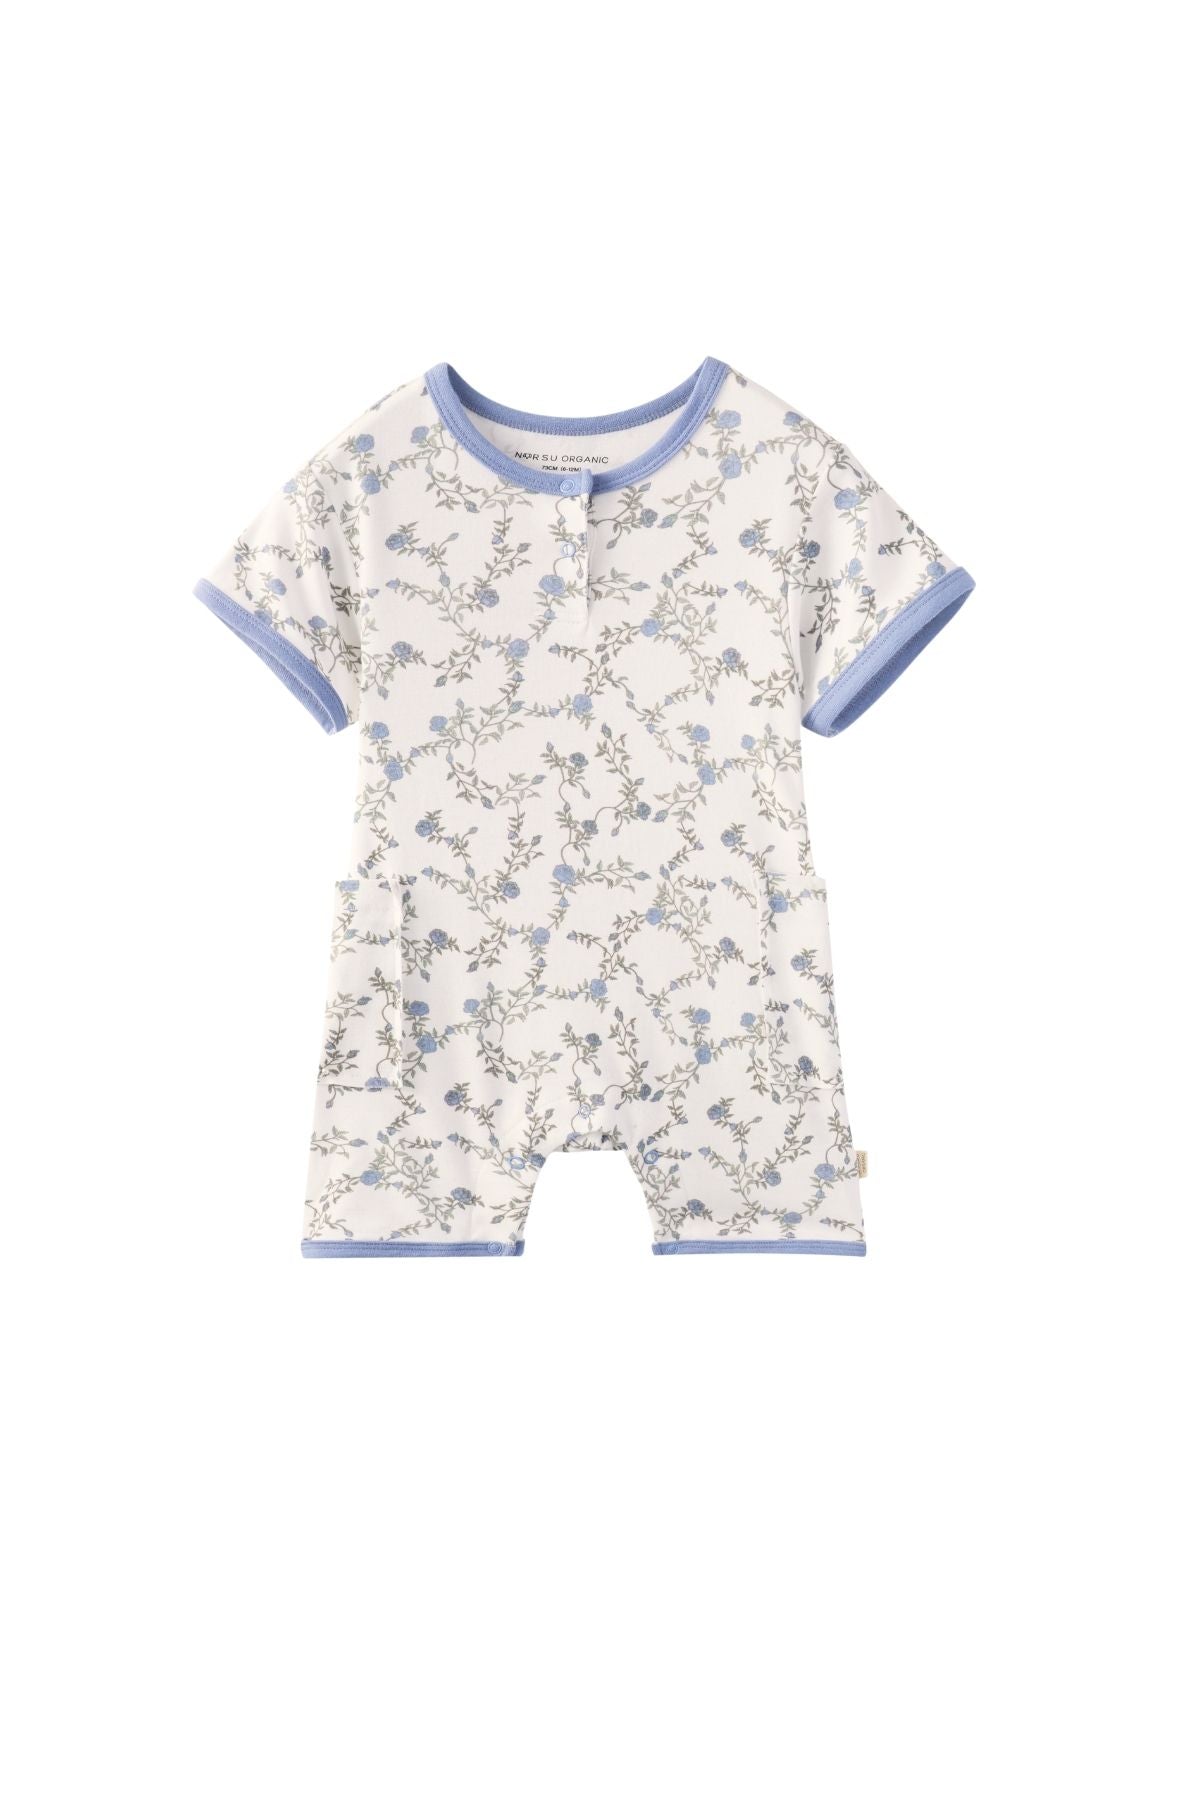 image for Baby Organic Bamboo Romper-Roses